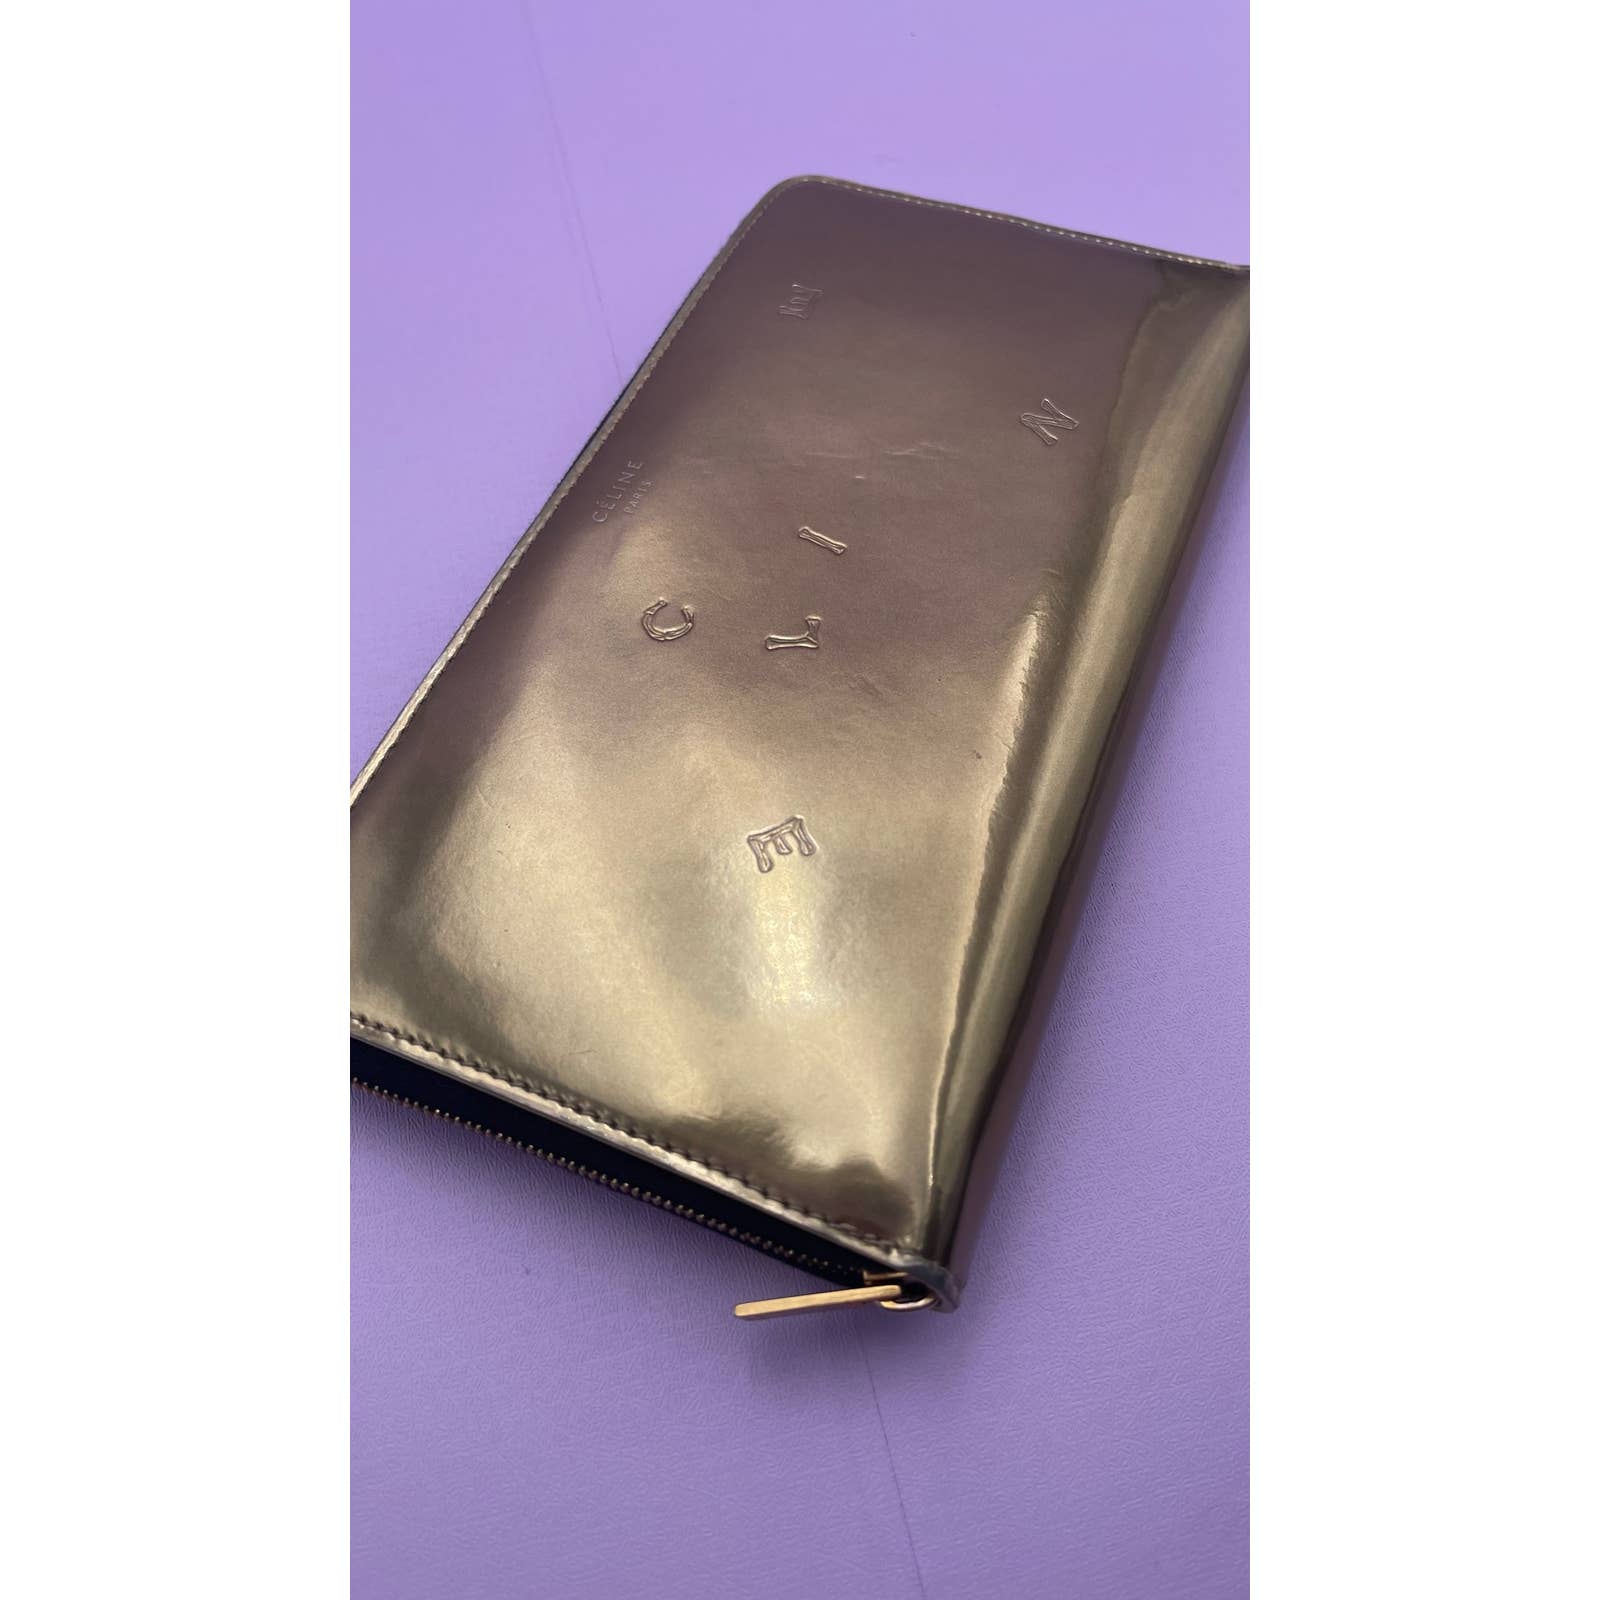 A sleek, metallic Celine Alphabet Wallet Gold lies flat on a pastel purple surface. The patent leather wallet reflects light, showing a lustrous finish. Stamped letters are subtly visible on its surface, but the full text is not entirely clear.

